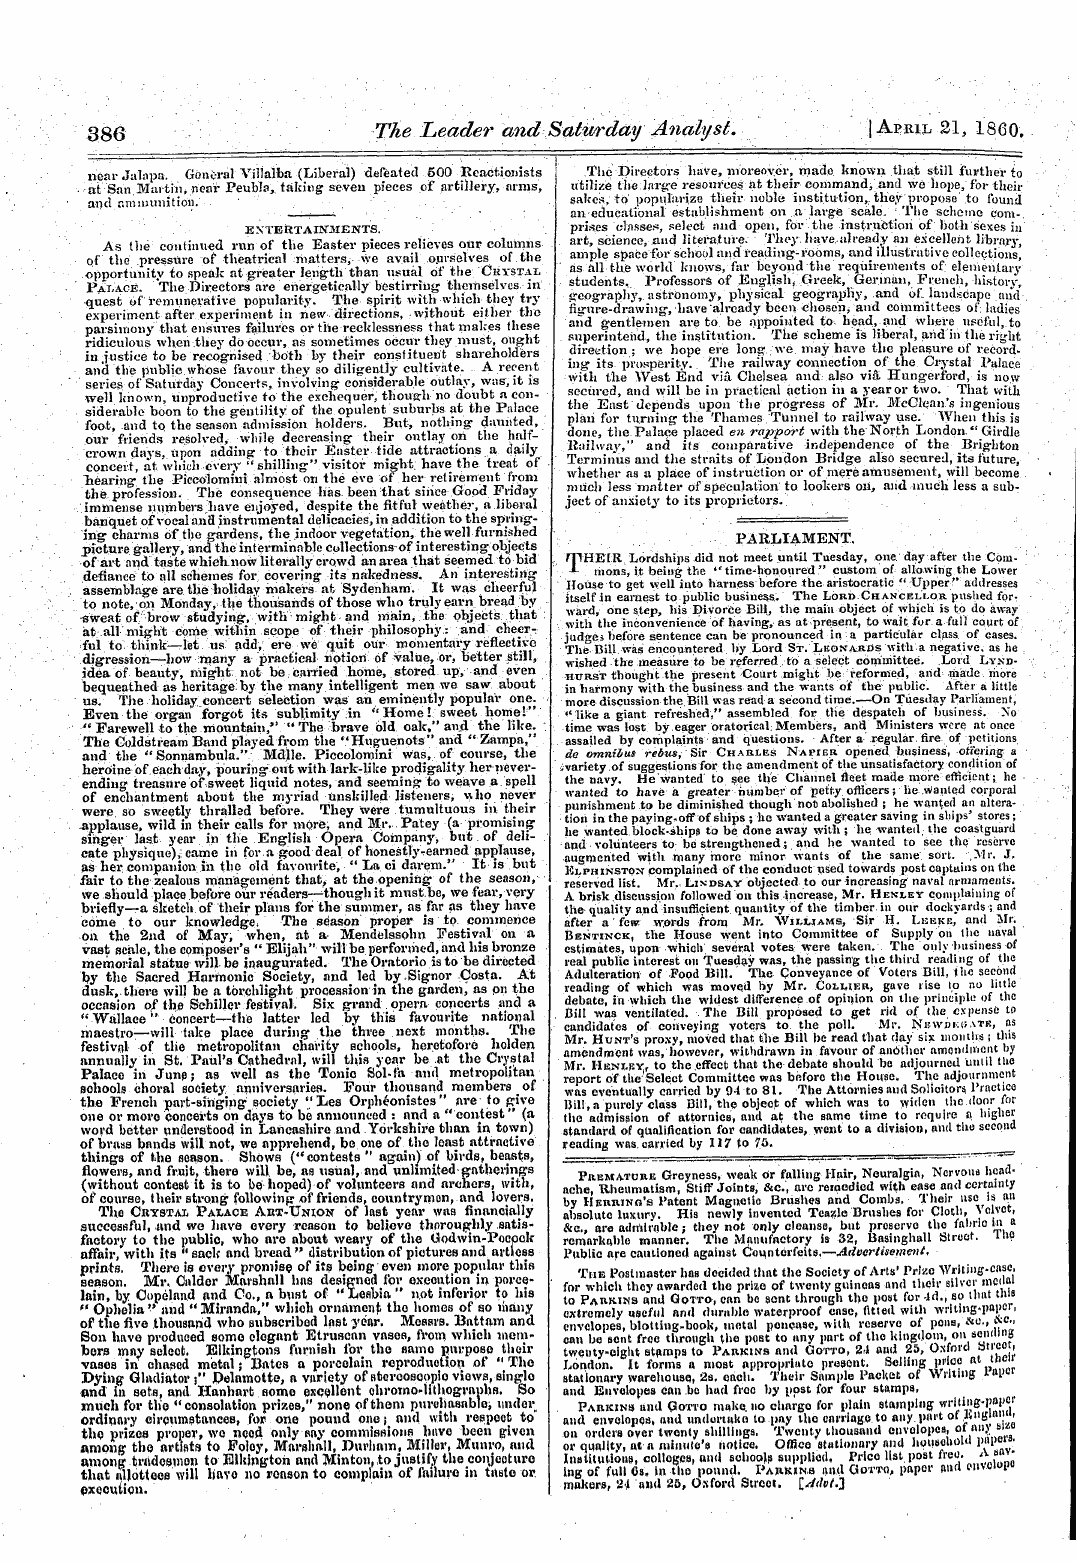 Leader (1850-1860): jS F Y, 1st edition - Parliament.